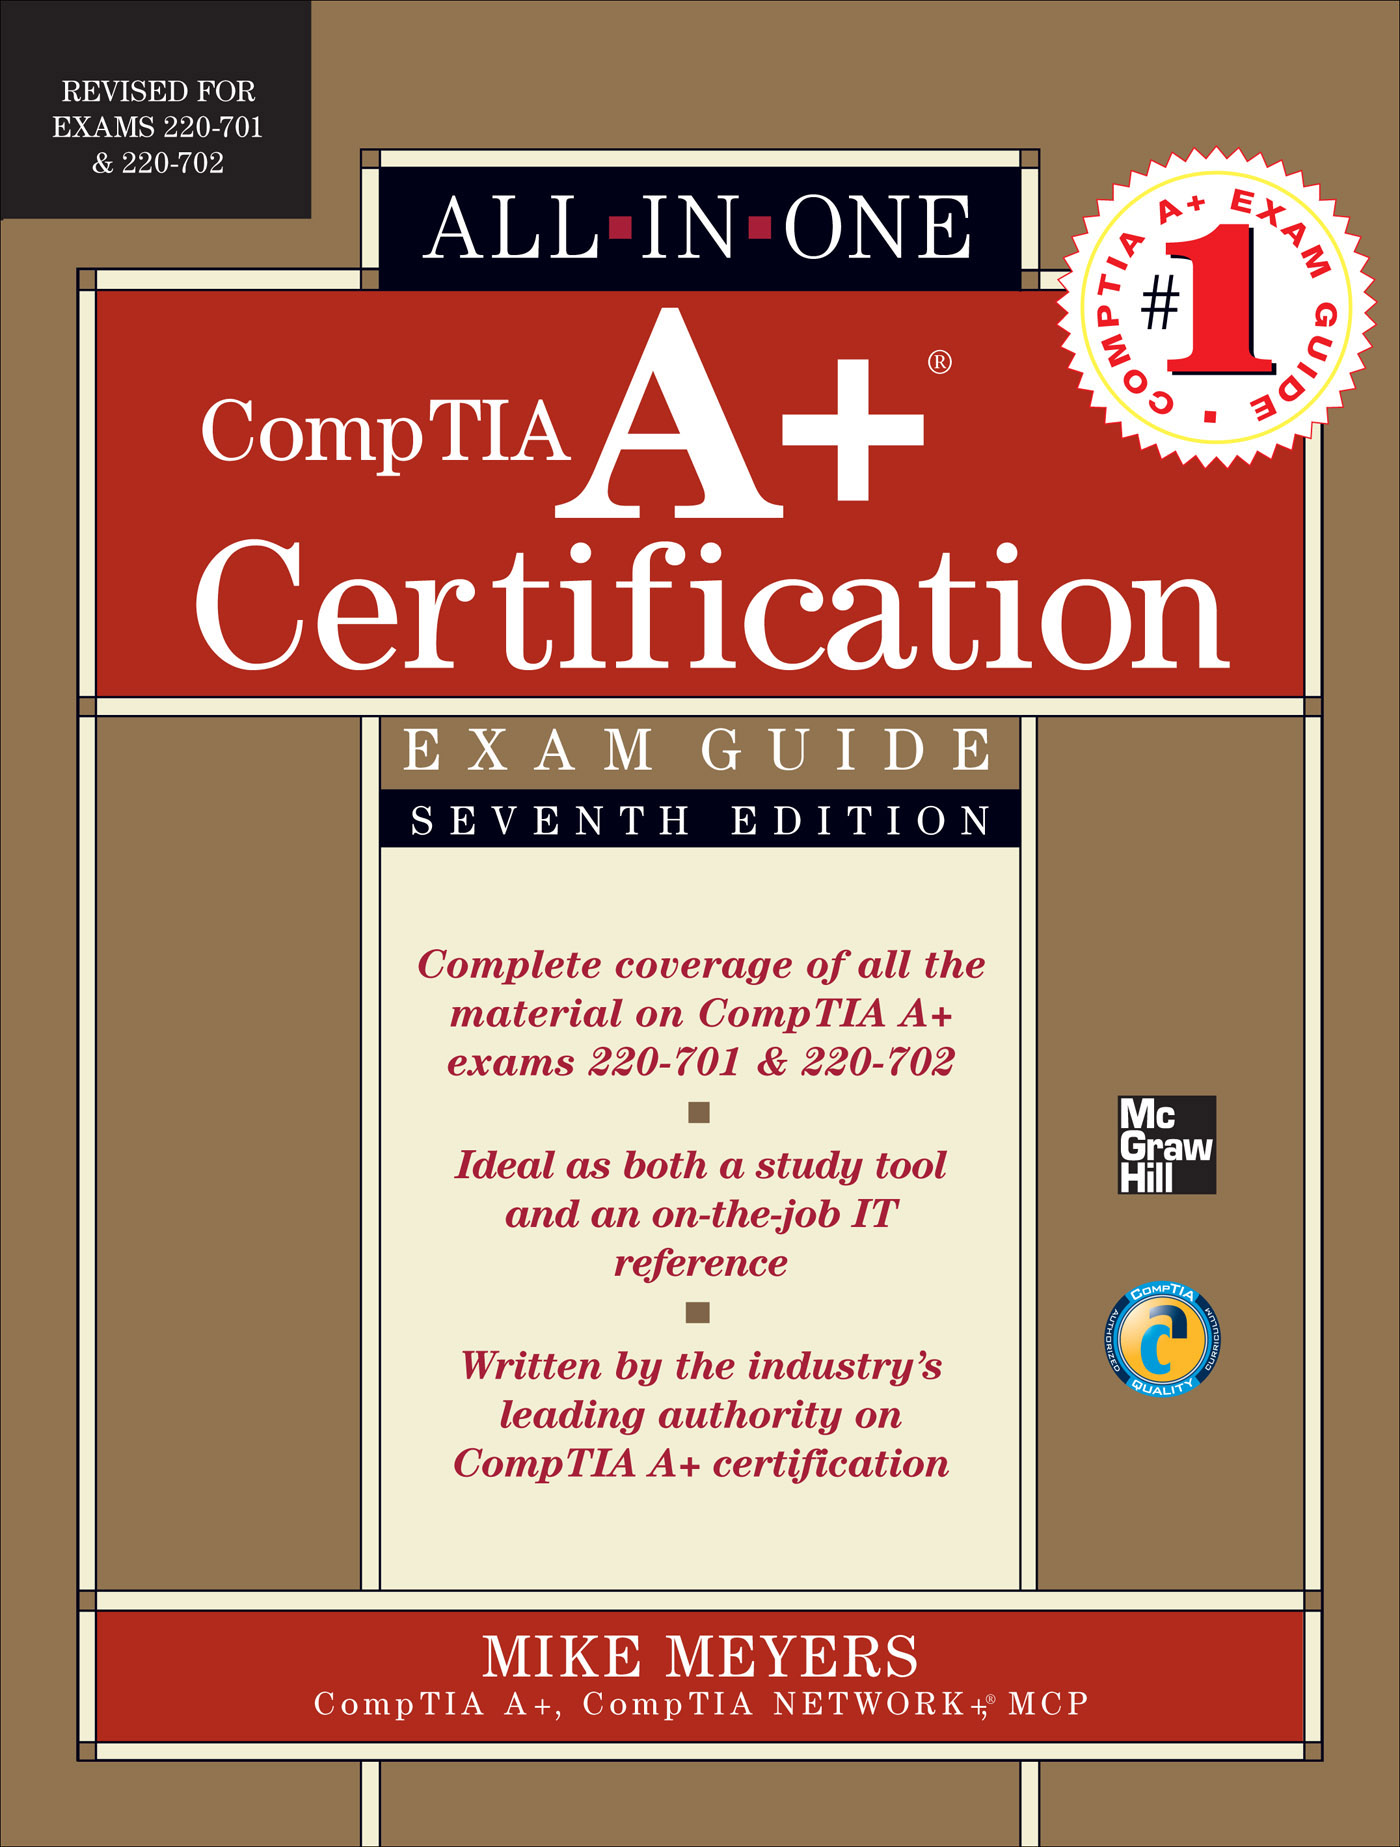 CompTIA A+ Certification All-in-One Exam Guide, Seventh Edition (Exams 220-701 & 220-702) - 50-99.99